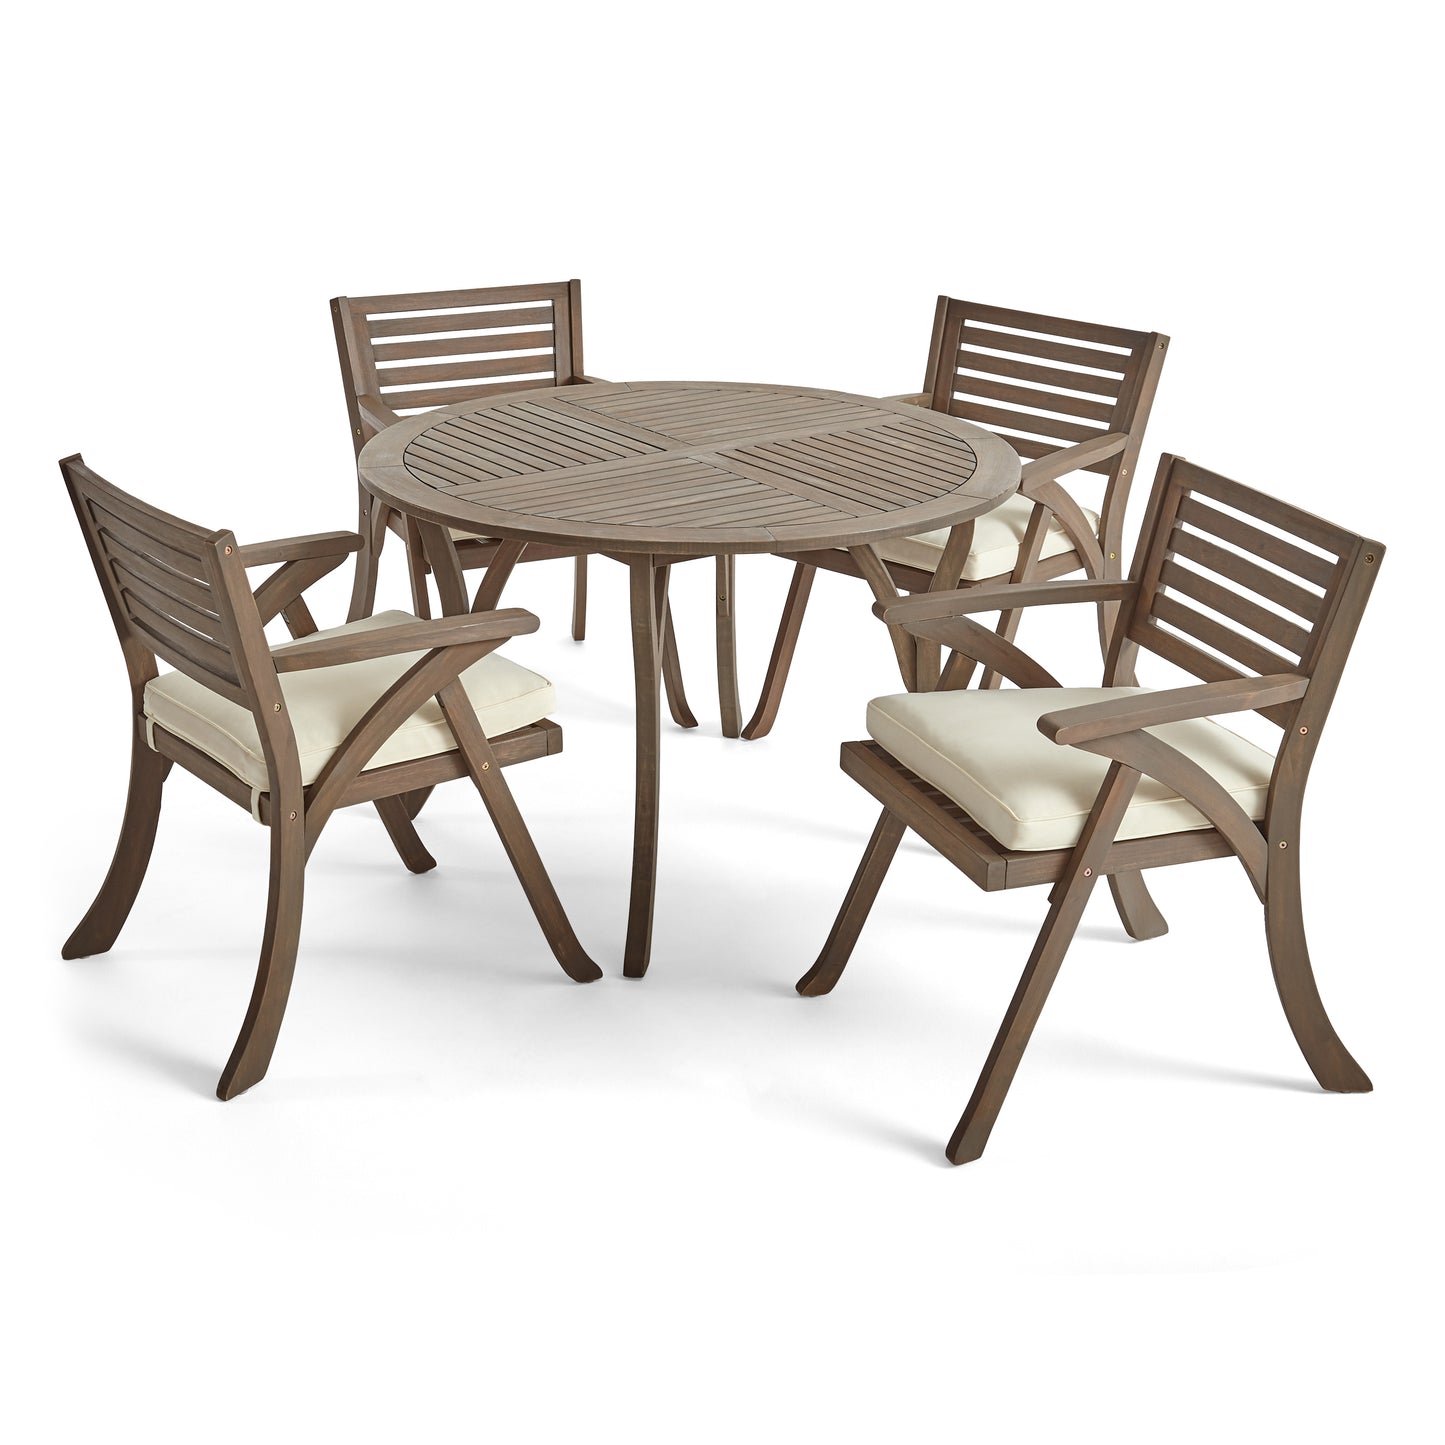 Hestia Outdoor 5 Piece Acacia Wood Dining Set with Round Table